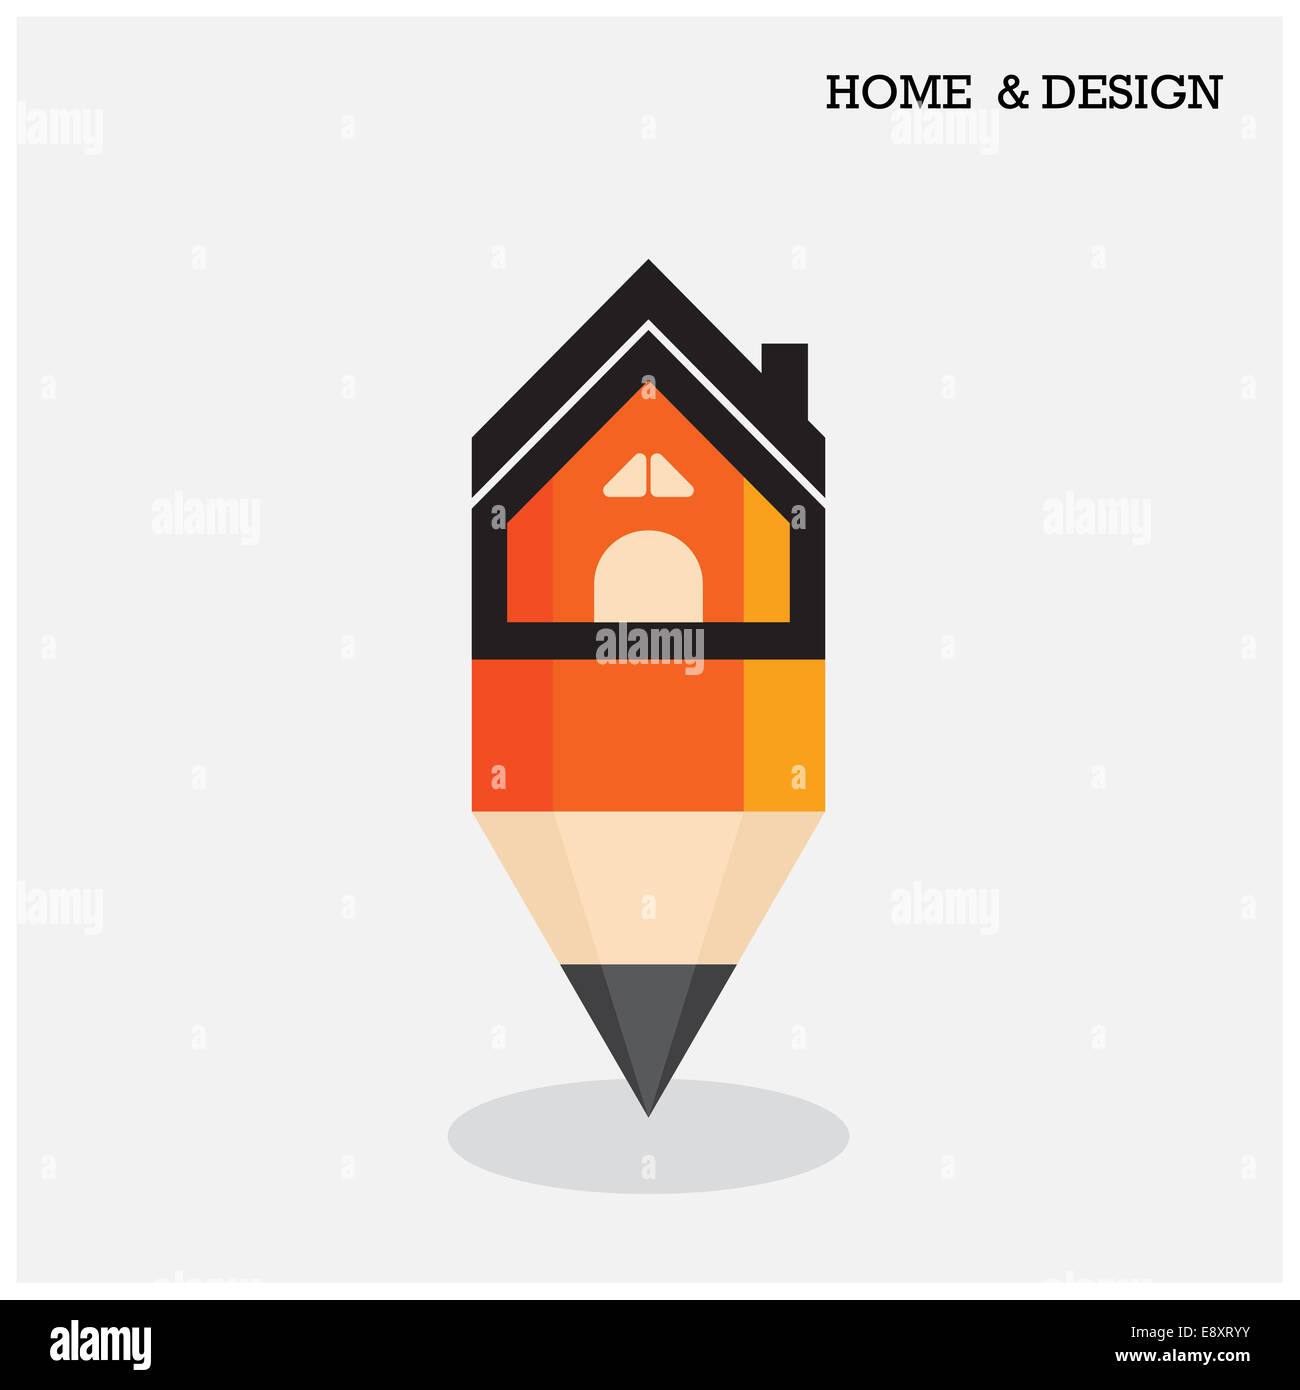 Home icon and pencil symbol in flat design style. Stock Photo